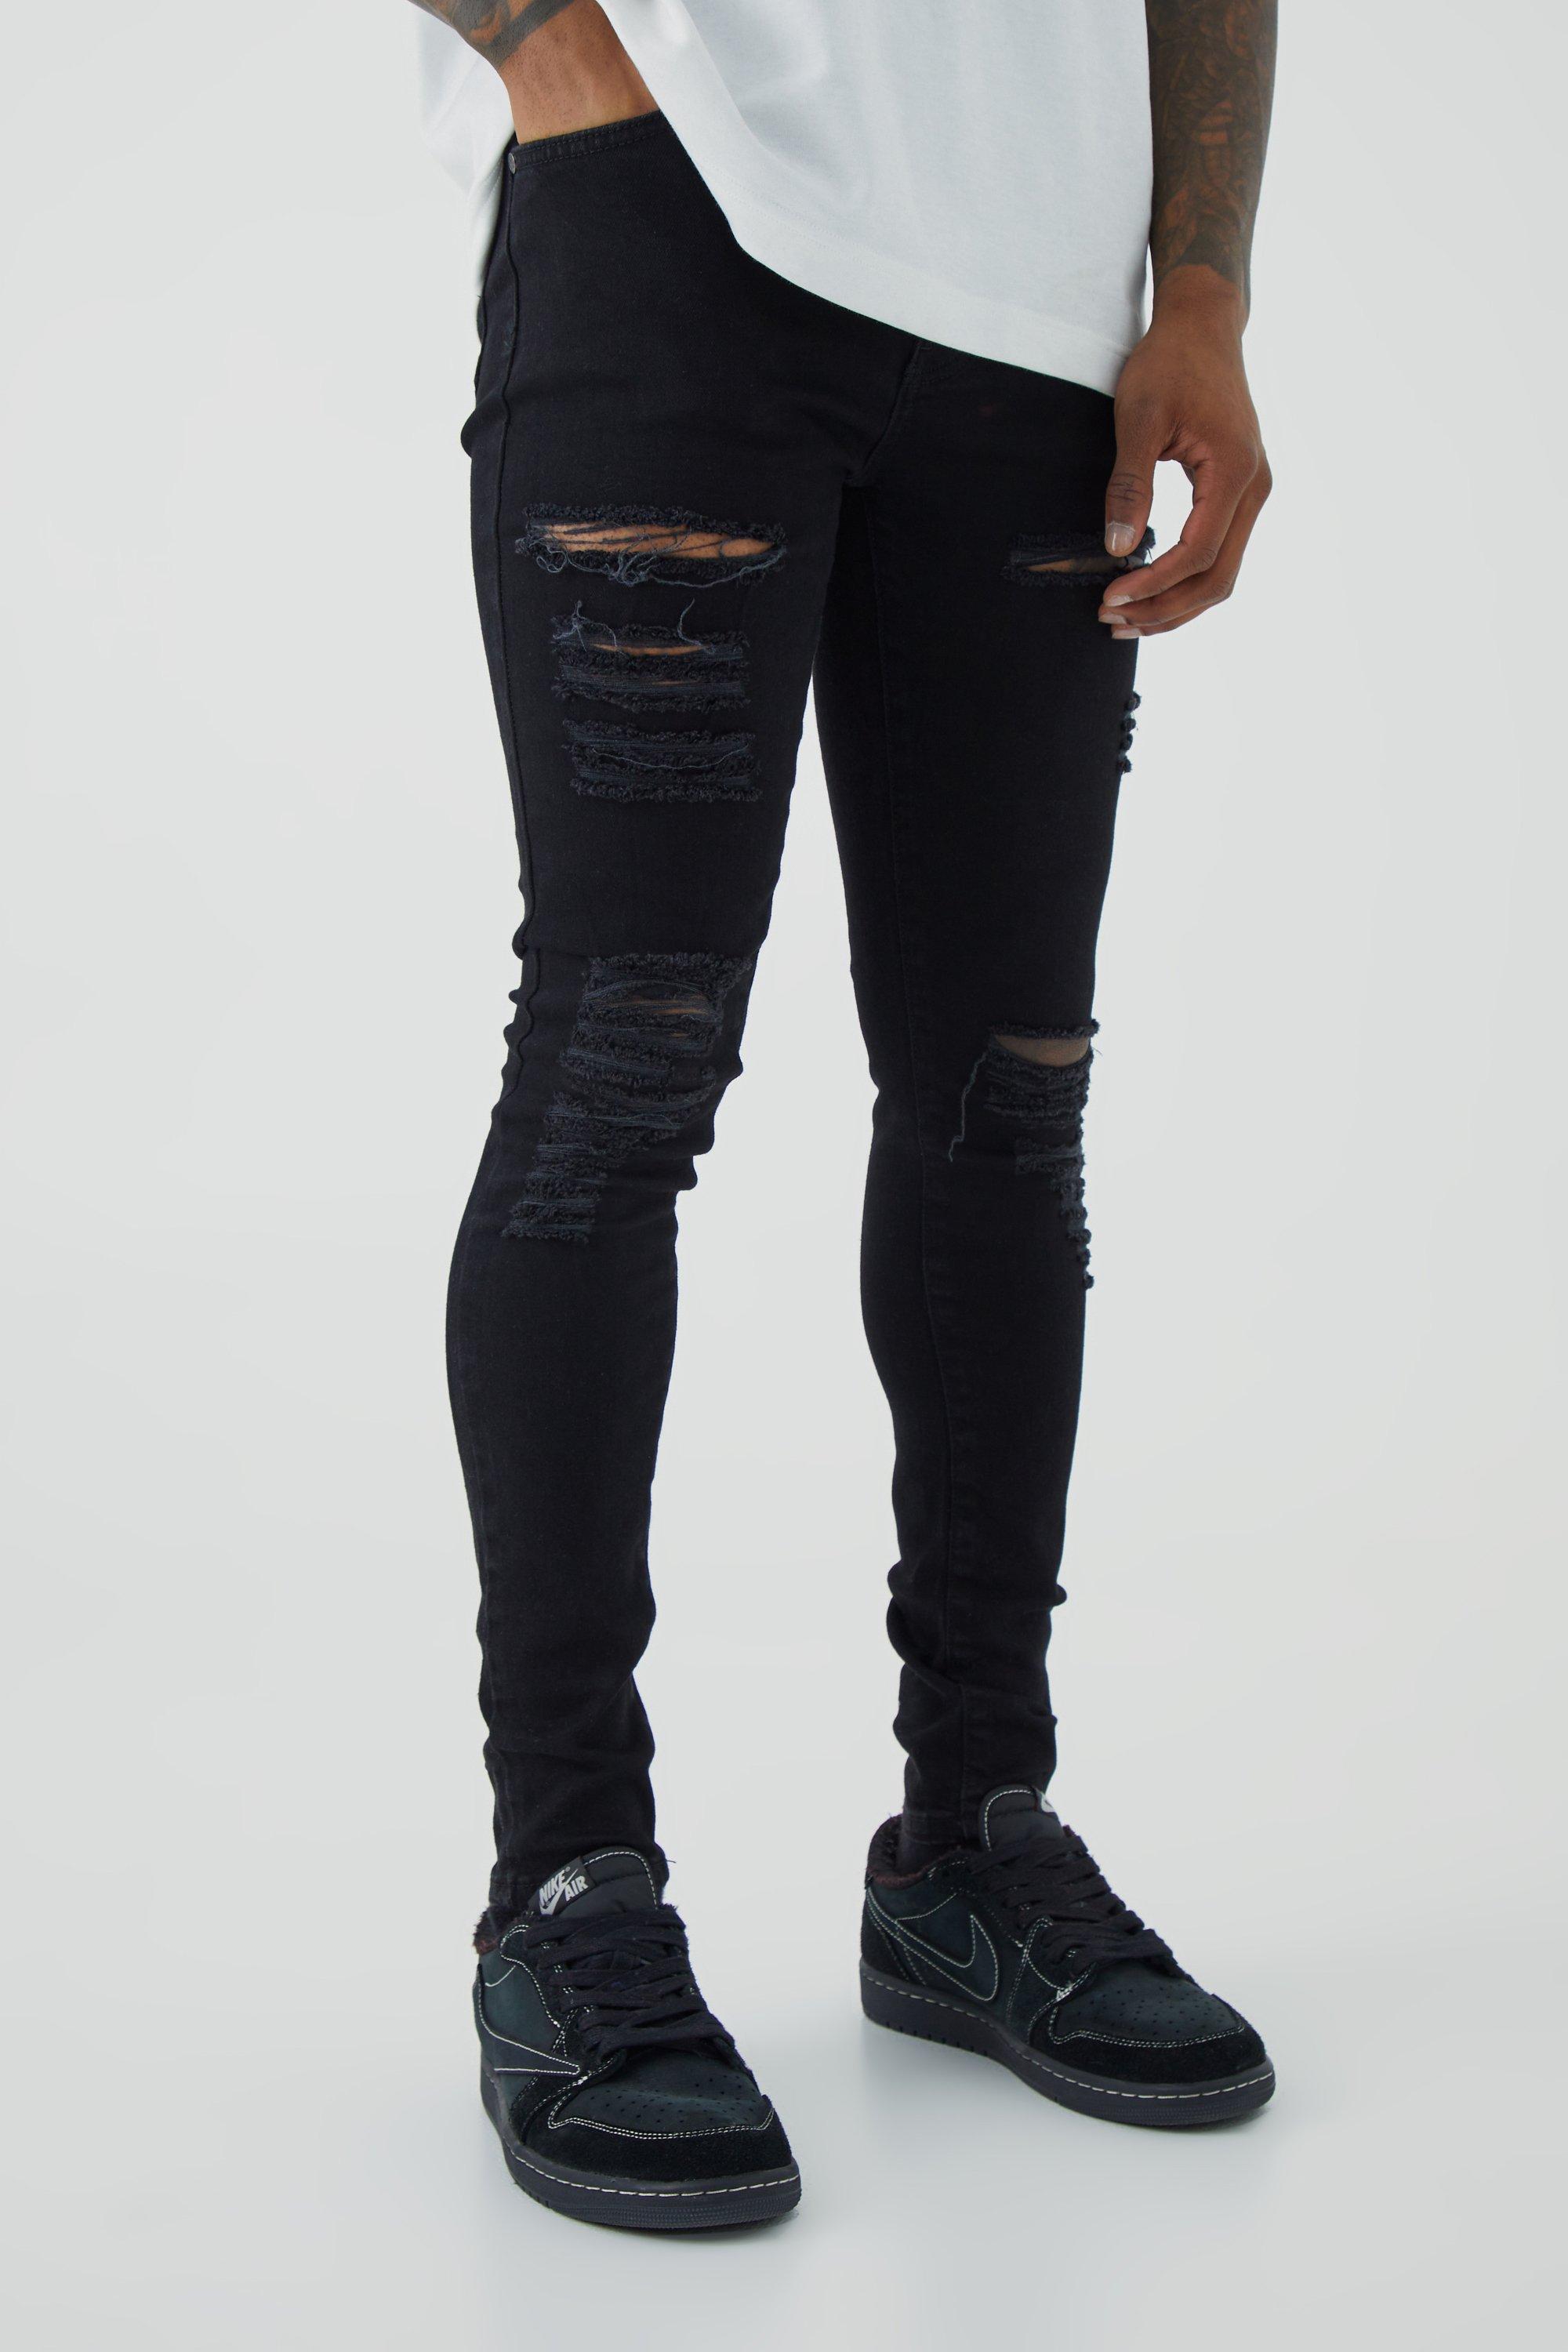 ASOS DESIGN flare jeans in black leather look